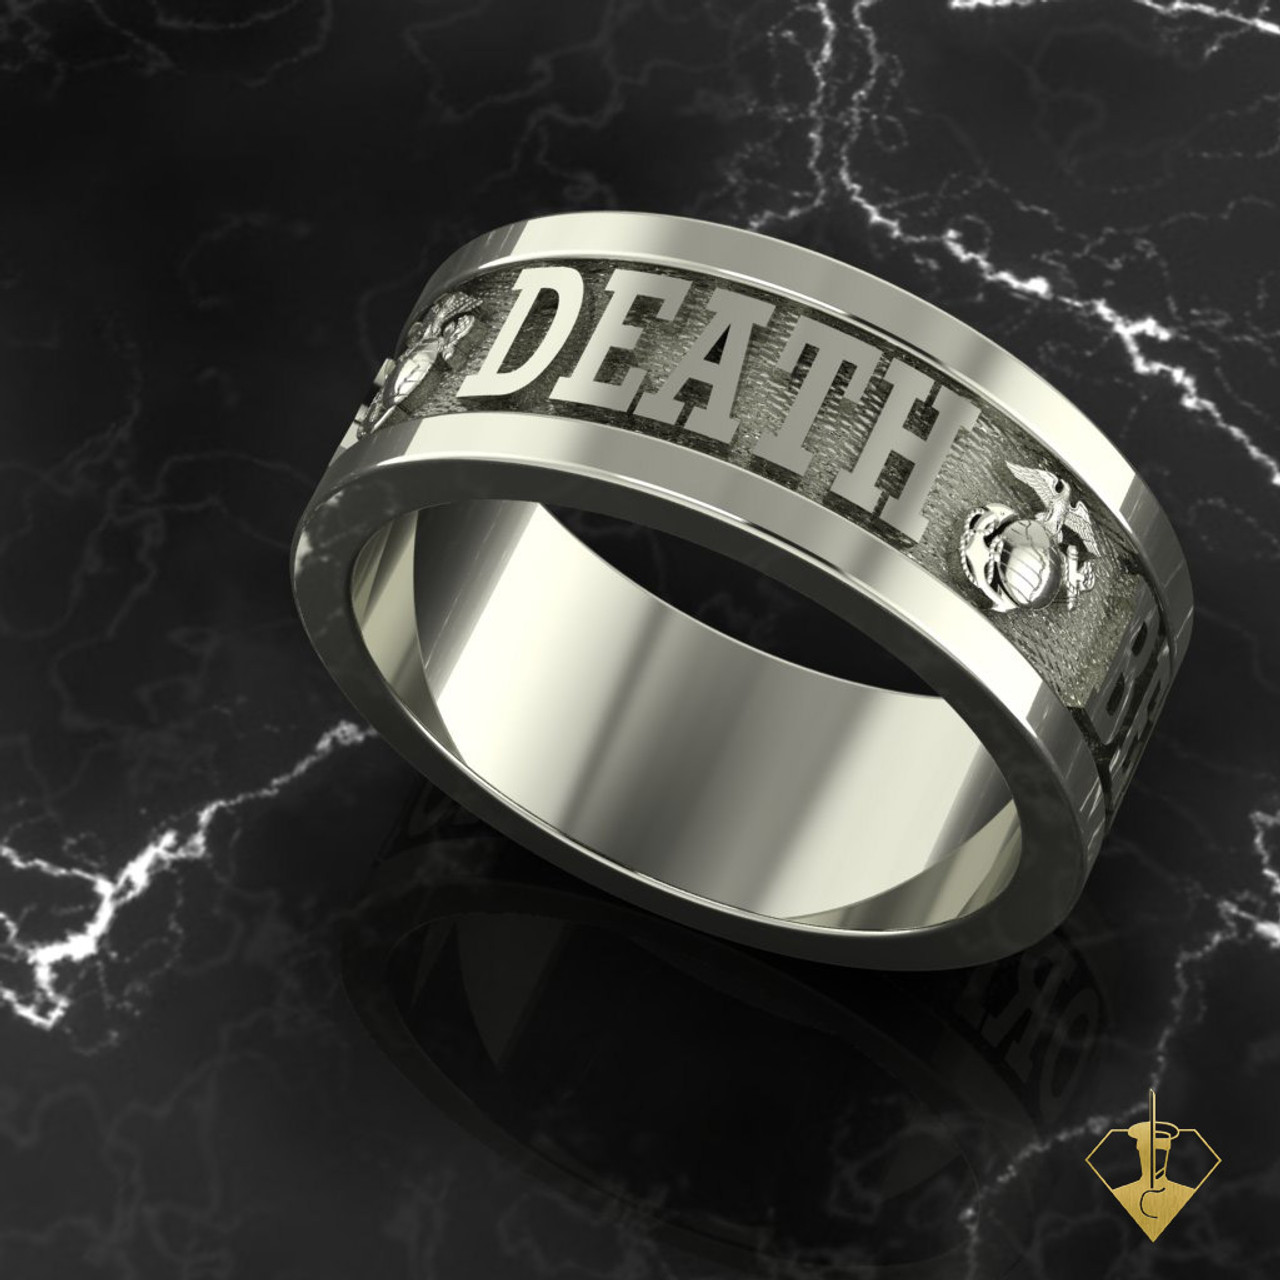 Death Before Dishonor USMC Ring
available in Sterling Silver, 10k, 14k and 18k
White or Yellow gold.
"Made by Marines for Marines"

100% Satisfaction Guaranteed